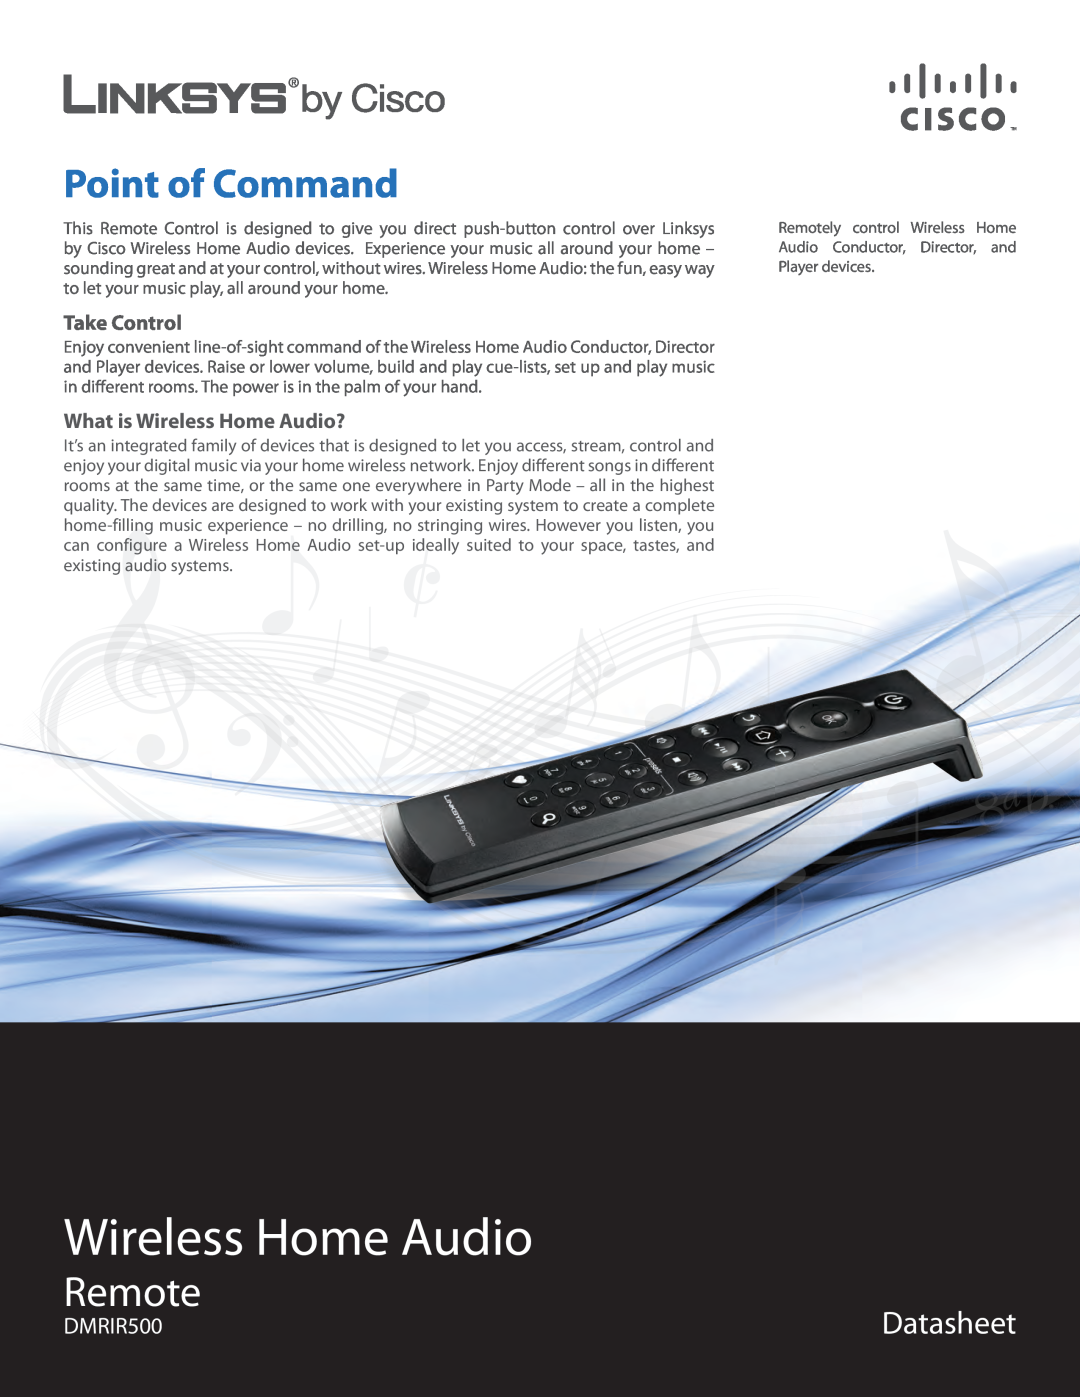 Linksys DMRIR500 manual Wireless Home Audio, Remote, Point of Command, Datasheet, Take Control 